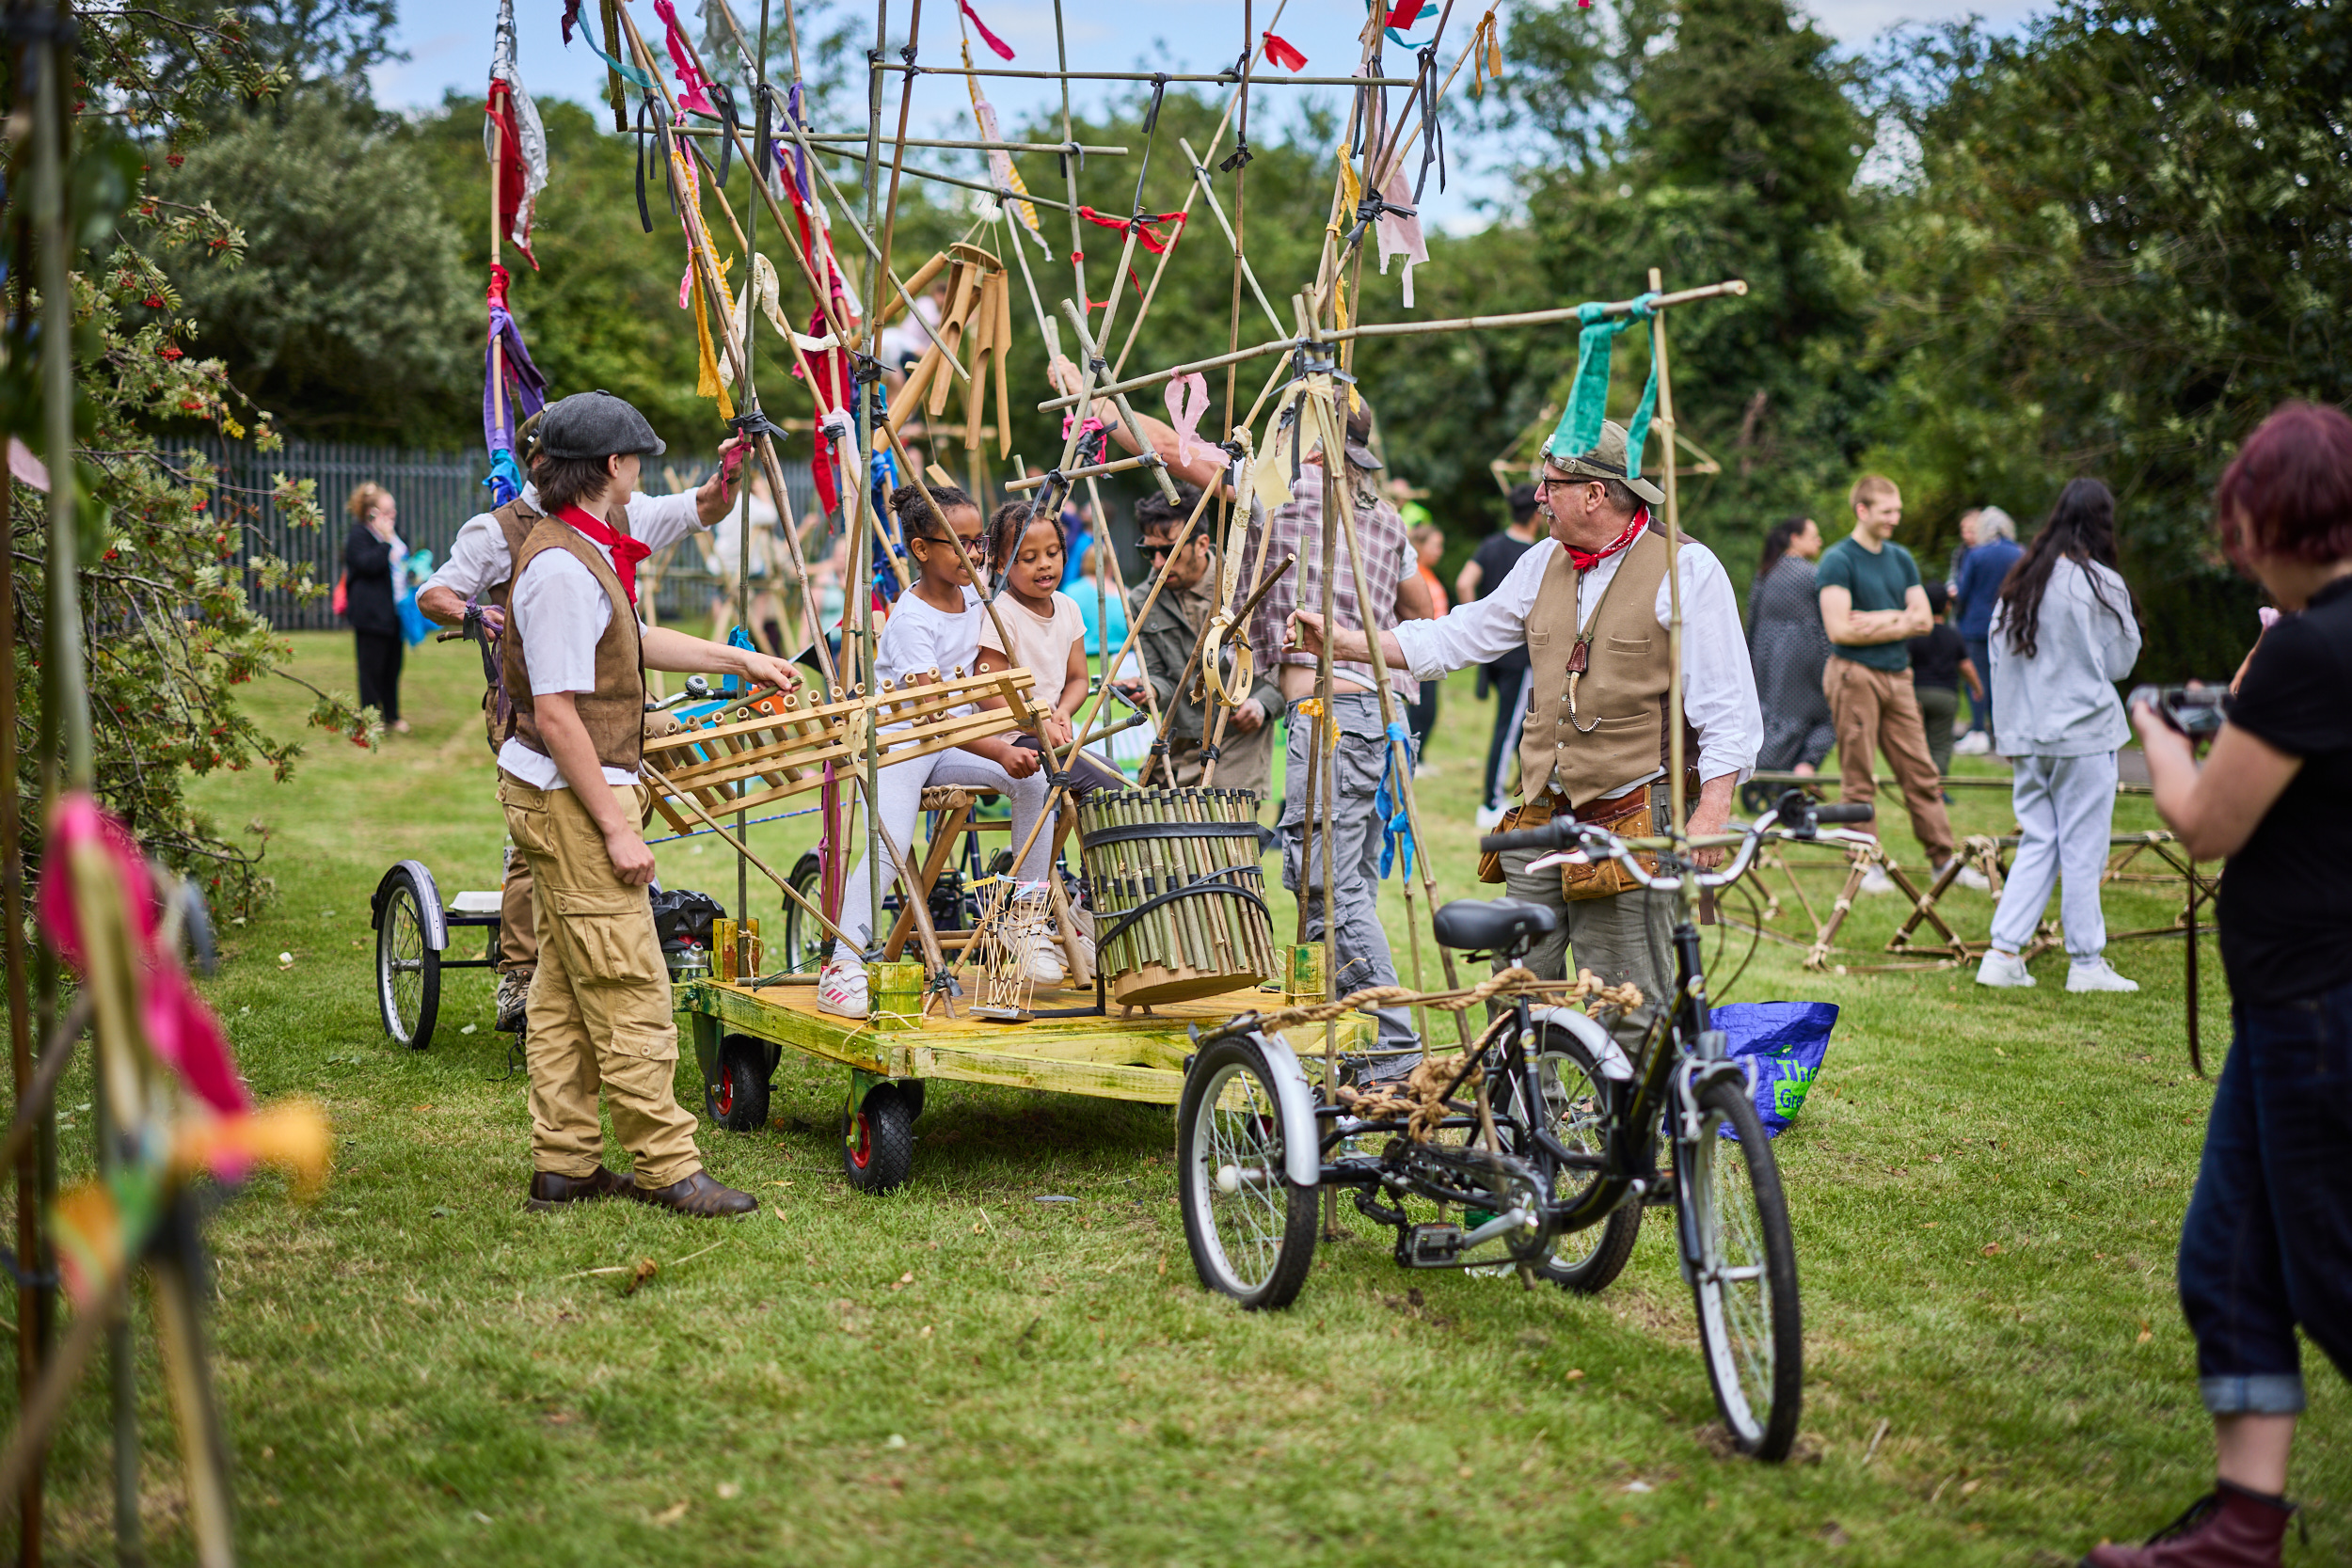 A trike holds a trailer filled with  bamboo structures, flags, musical instruments and children